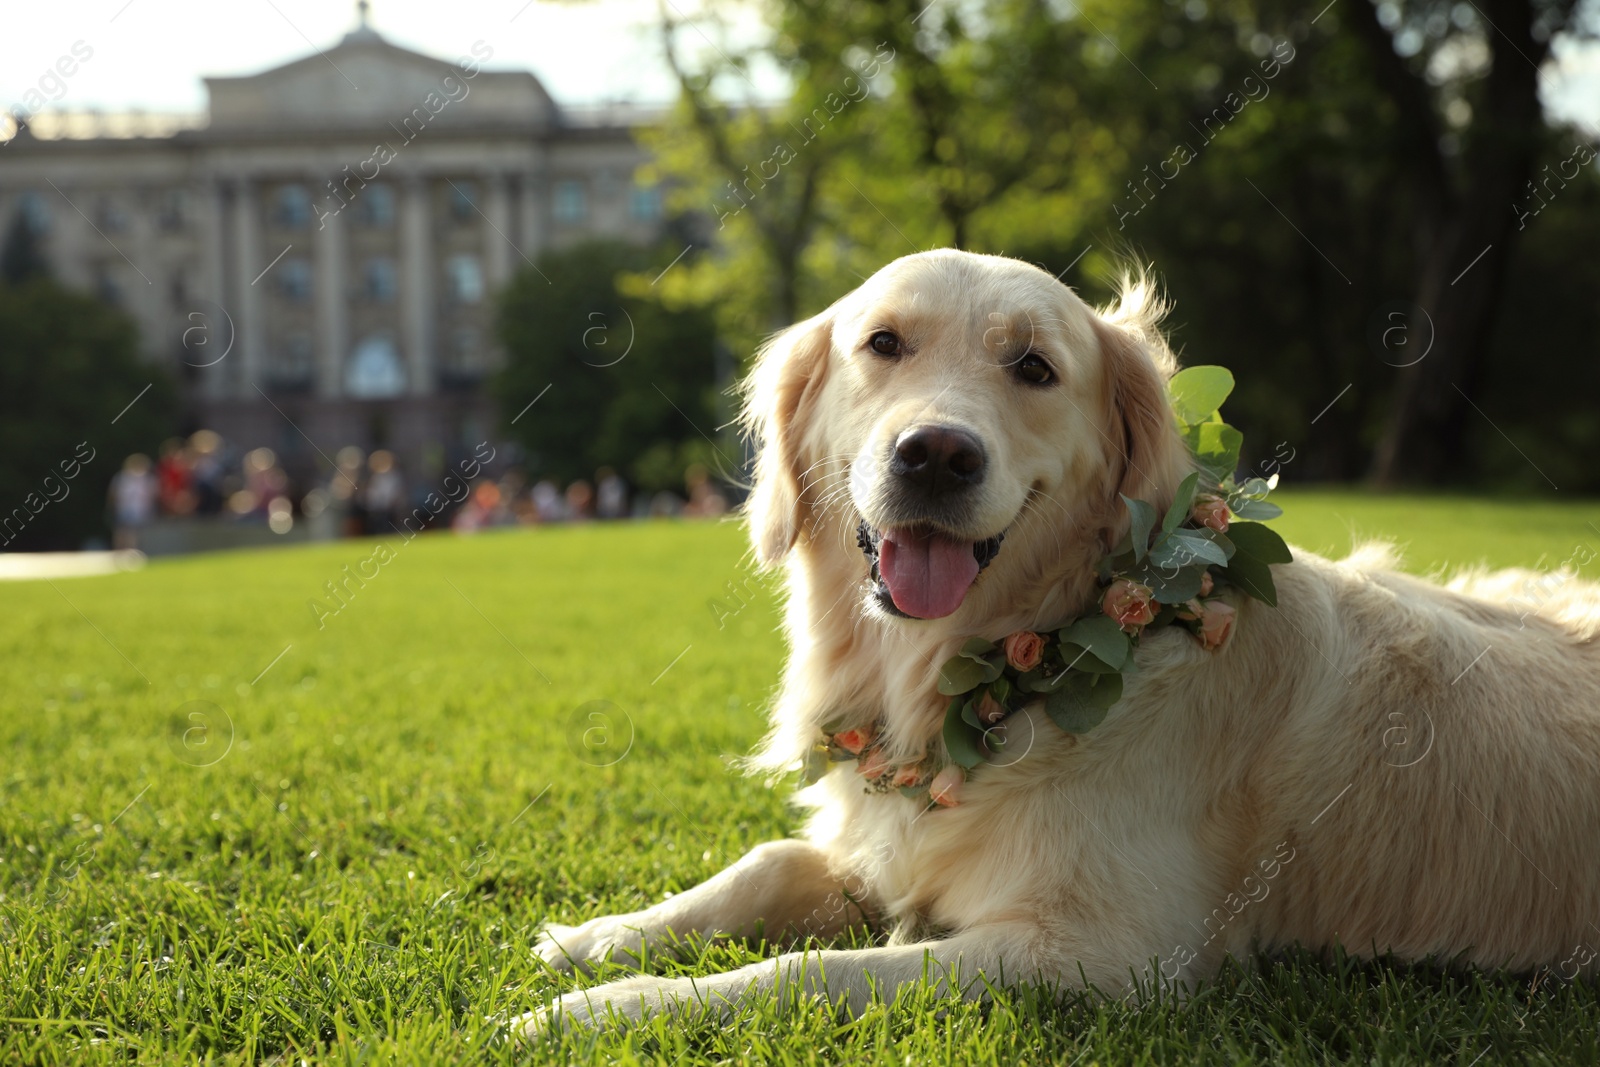 Photo of Adorable Golden Retriever wearing wreath made of beautiful flowers on green grass outdoors. Space for text